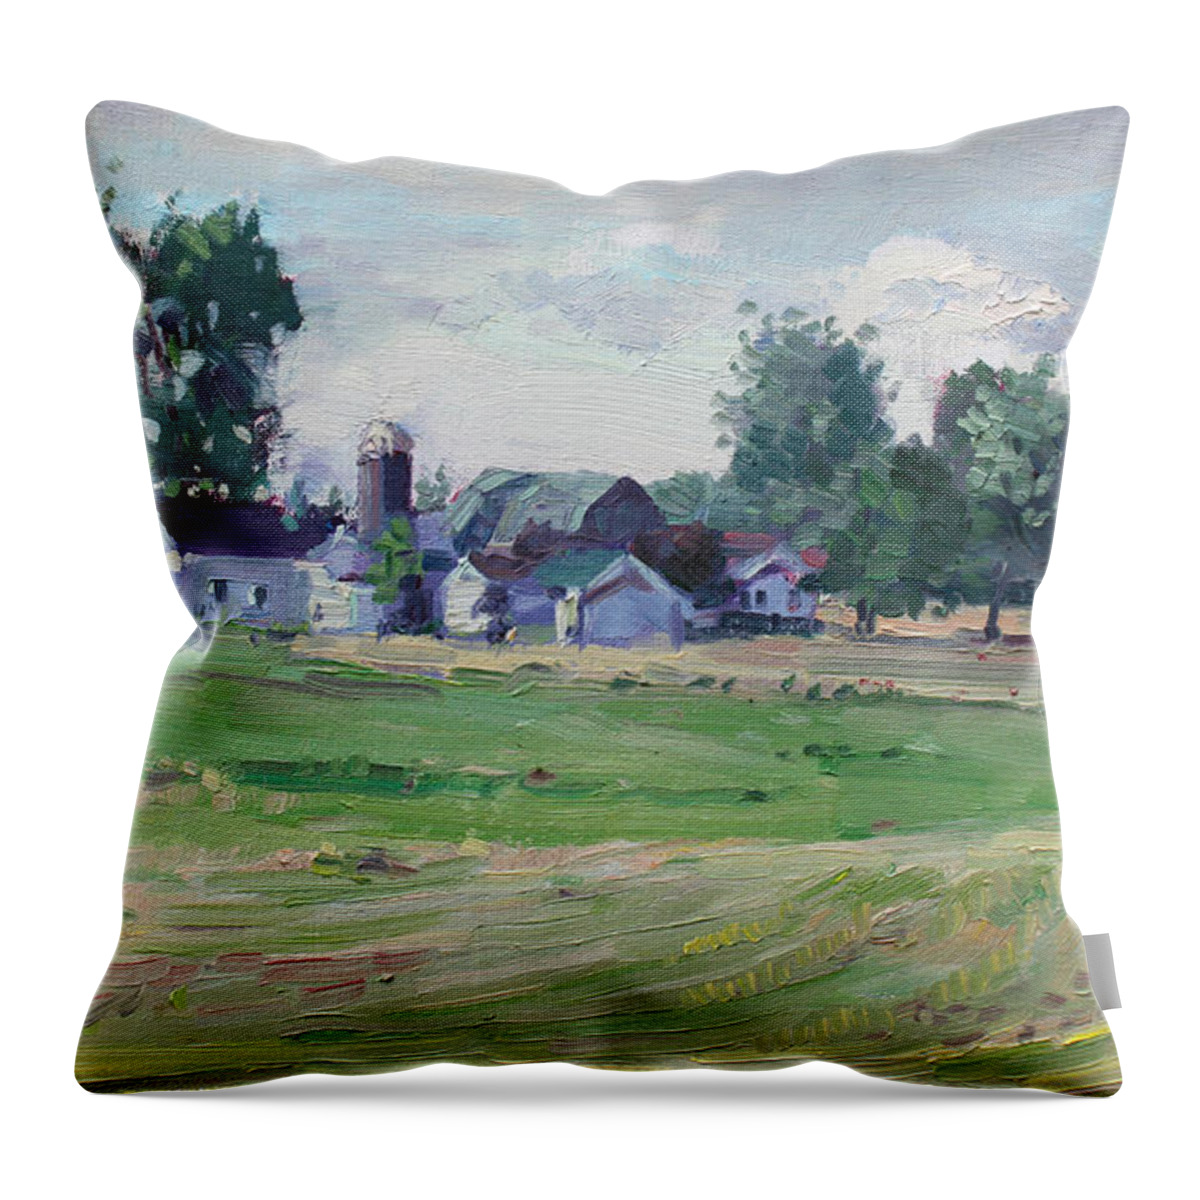 Farm Throw Pillow featuring the painting Farm by Ylli Haruni